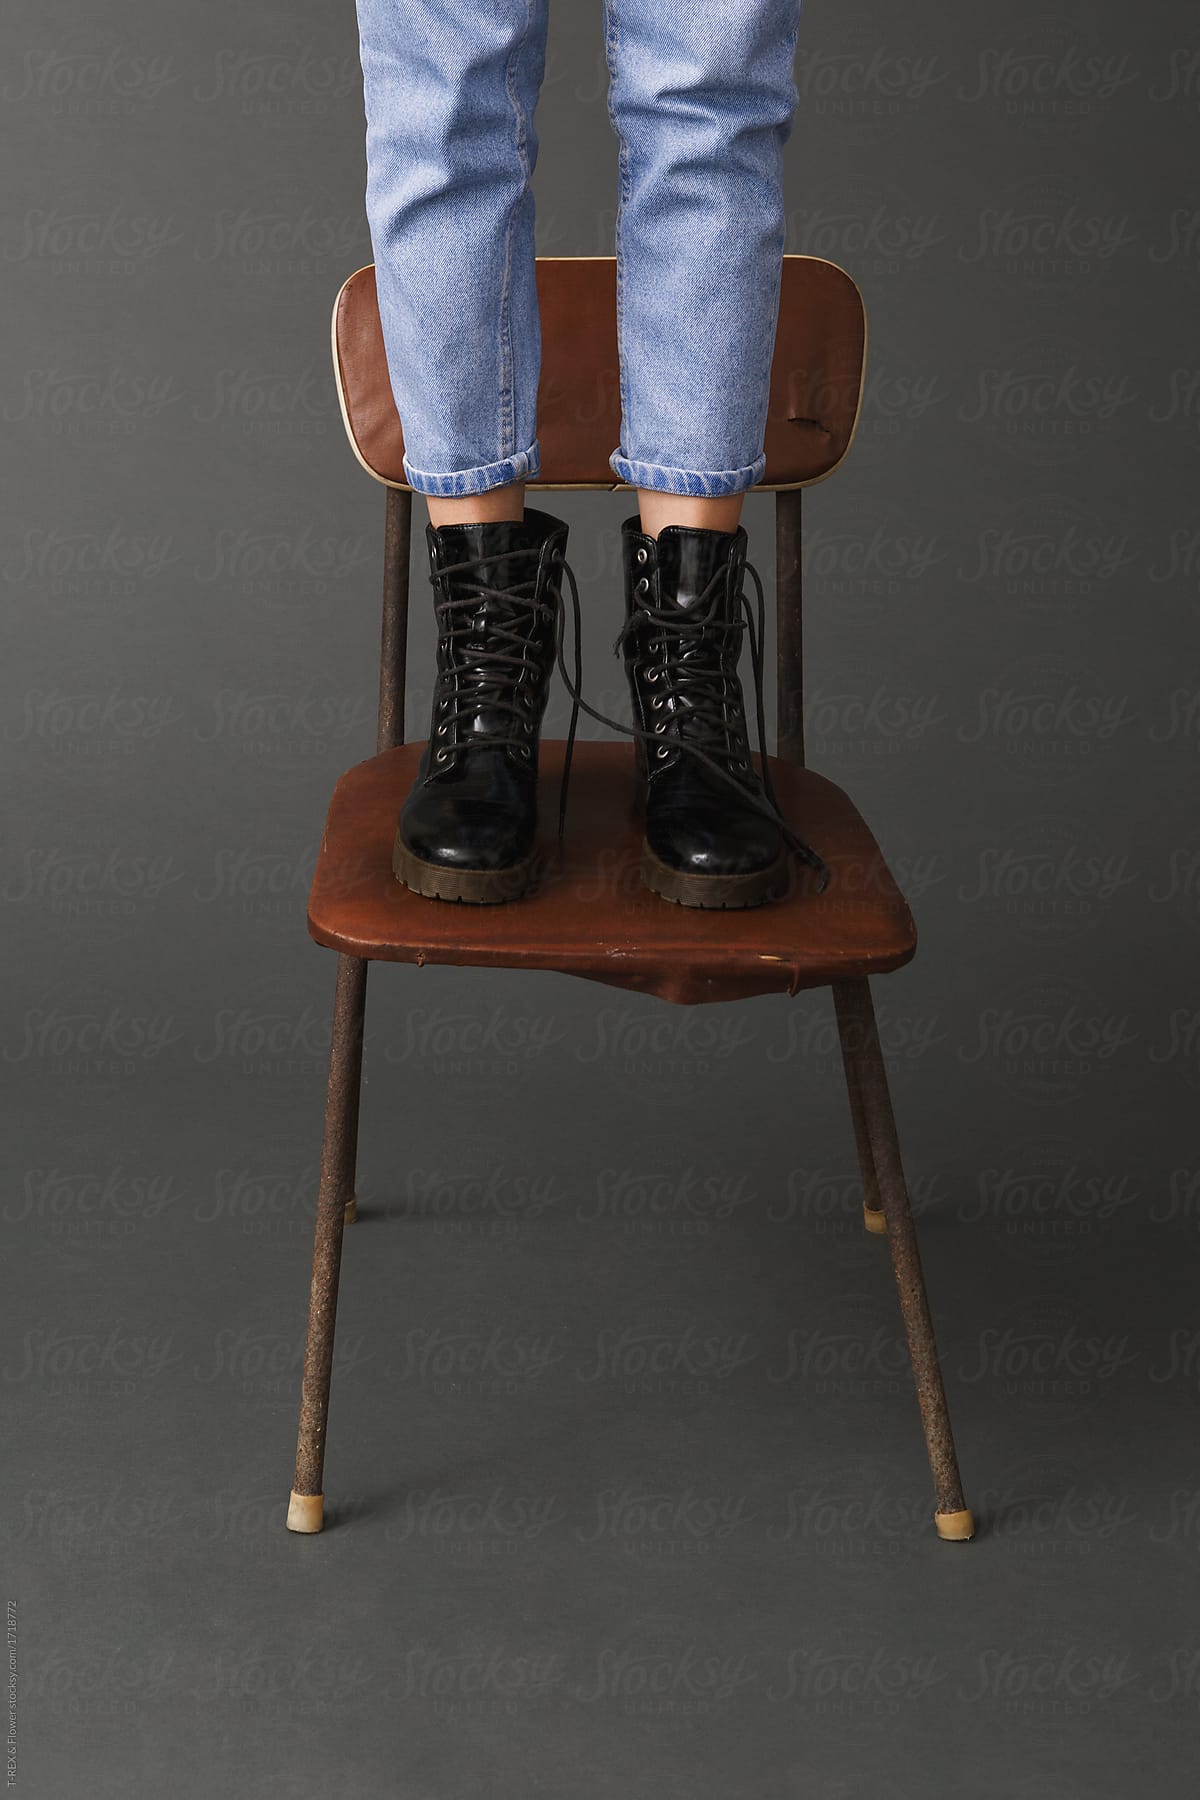 Woman standing on old chair